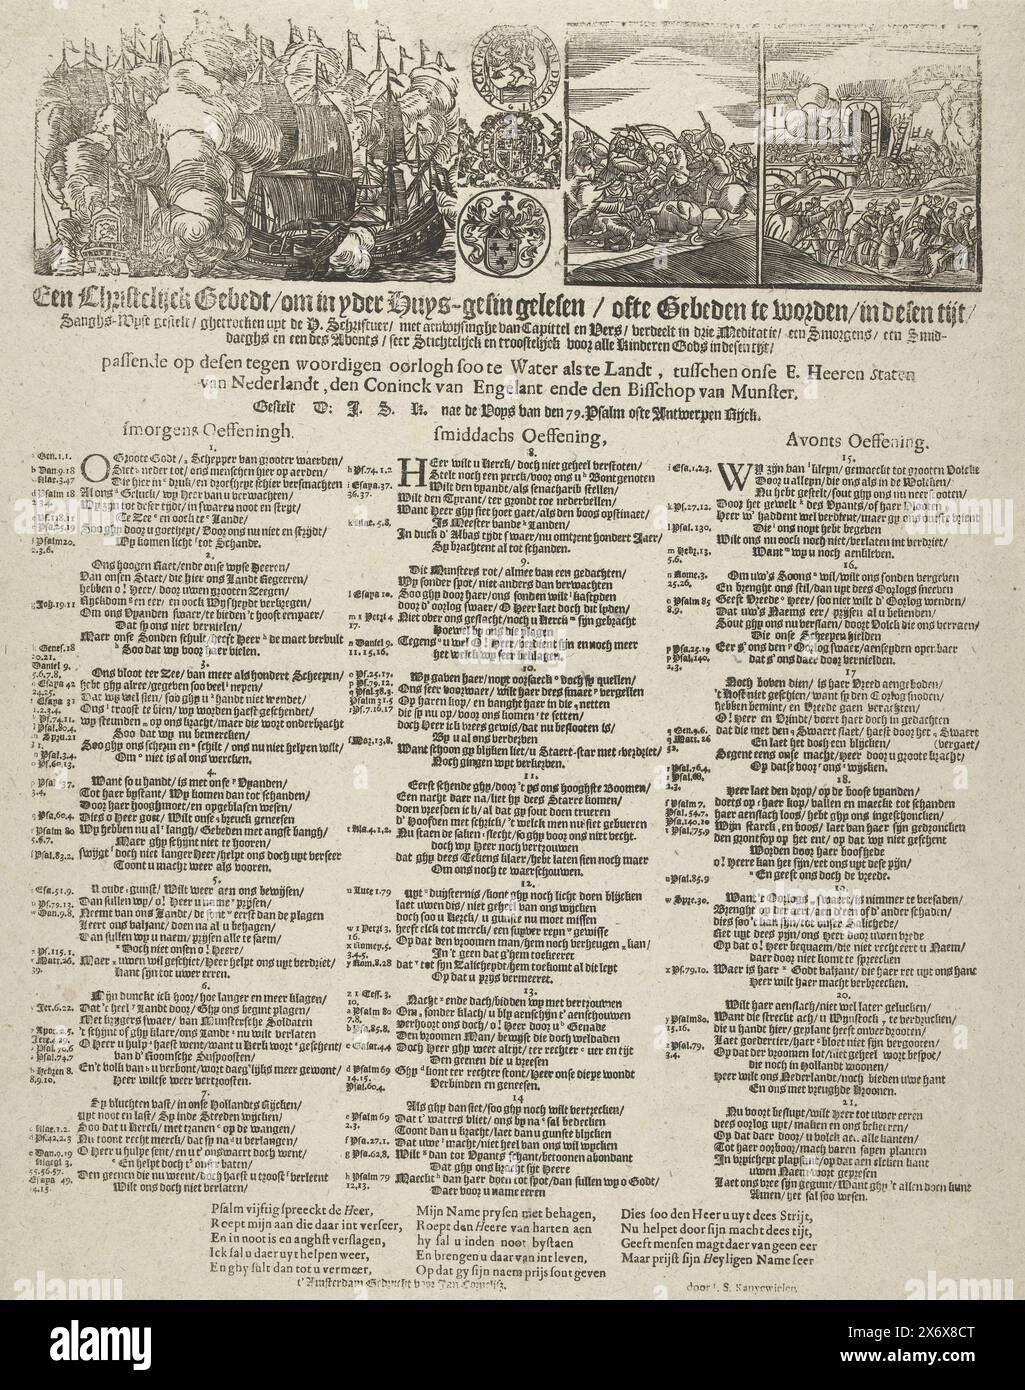 Prayer at the outbreak of the Second English War, 1665, A Christian Prayer, to be read, or to be prayed, in each House community, at this time (...) appropriate to the current war, both on Water and in Land, between our E. Heeren states of the Netherlands andt, the Coninck van Engelant and the Bisschop van Munster (title on object), Sheet with a prayer at the outbreak of the Second English War, 1665. At the top, old representations of a sea battle, the weapons of the Republic, England and the Bishop of Munster and two war scenes. Printed below on the sheet is the prayer in three parts for the Stock Photo